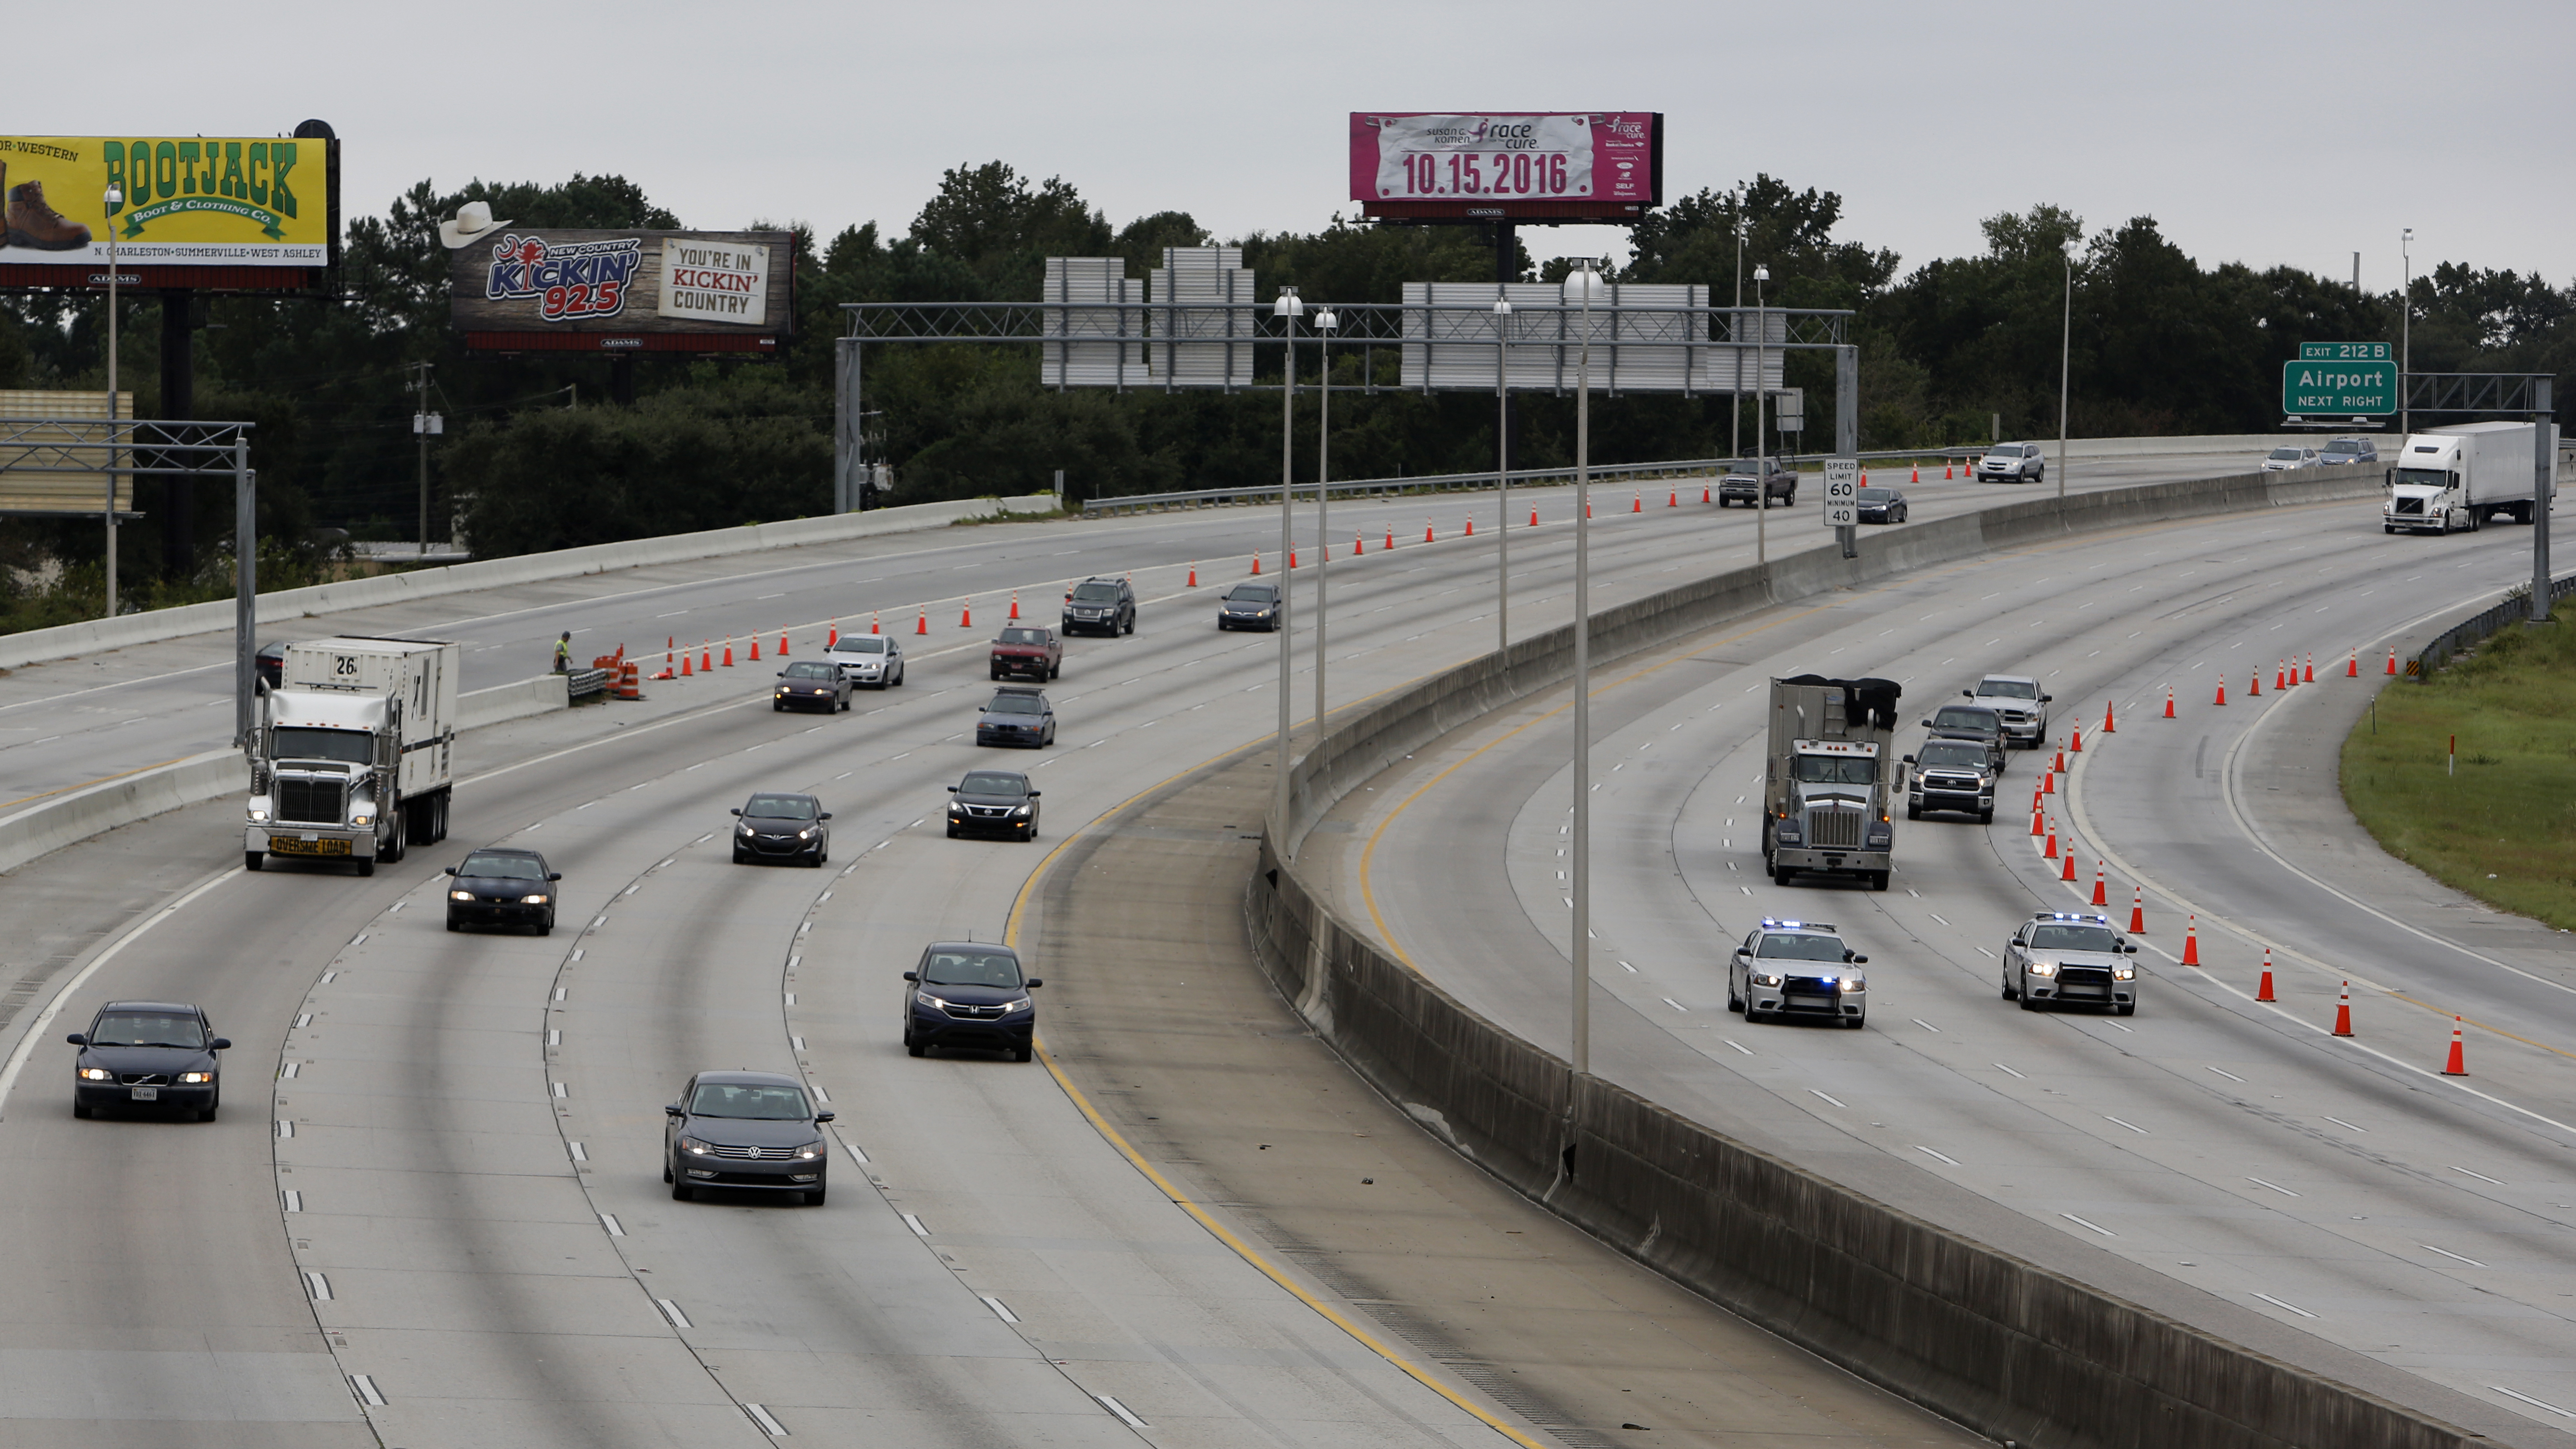 South Carolina state troopers (right) lead the first wave of cars evacuating on the reverse lane of Interstate 26 on Wednesday, as the state prepares for Hurricane Matthew. (Photo by Mic Smith/Associated Press)